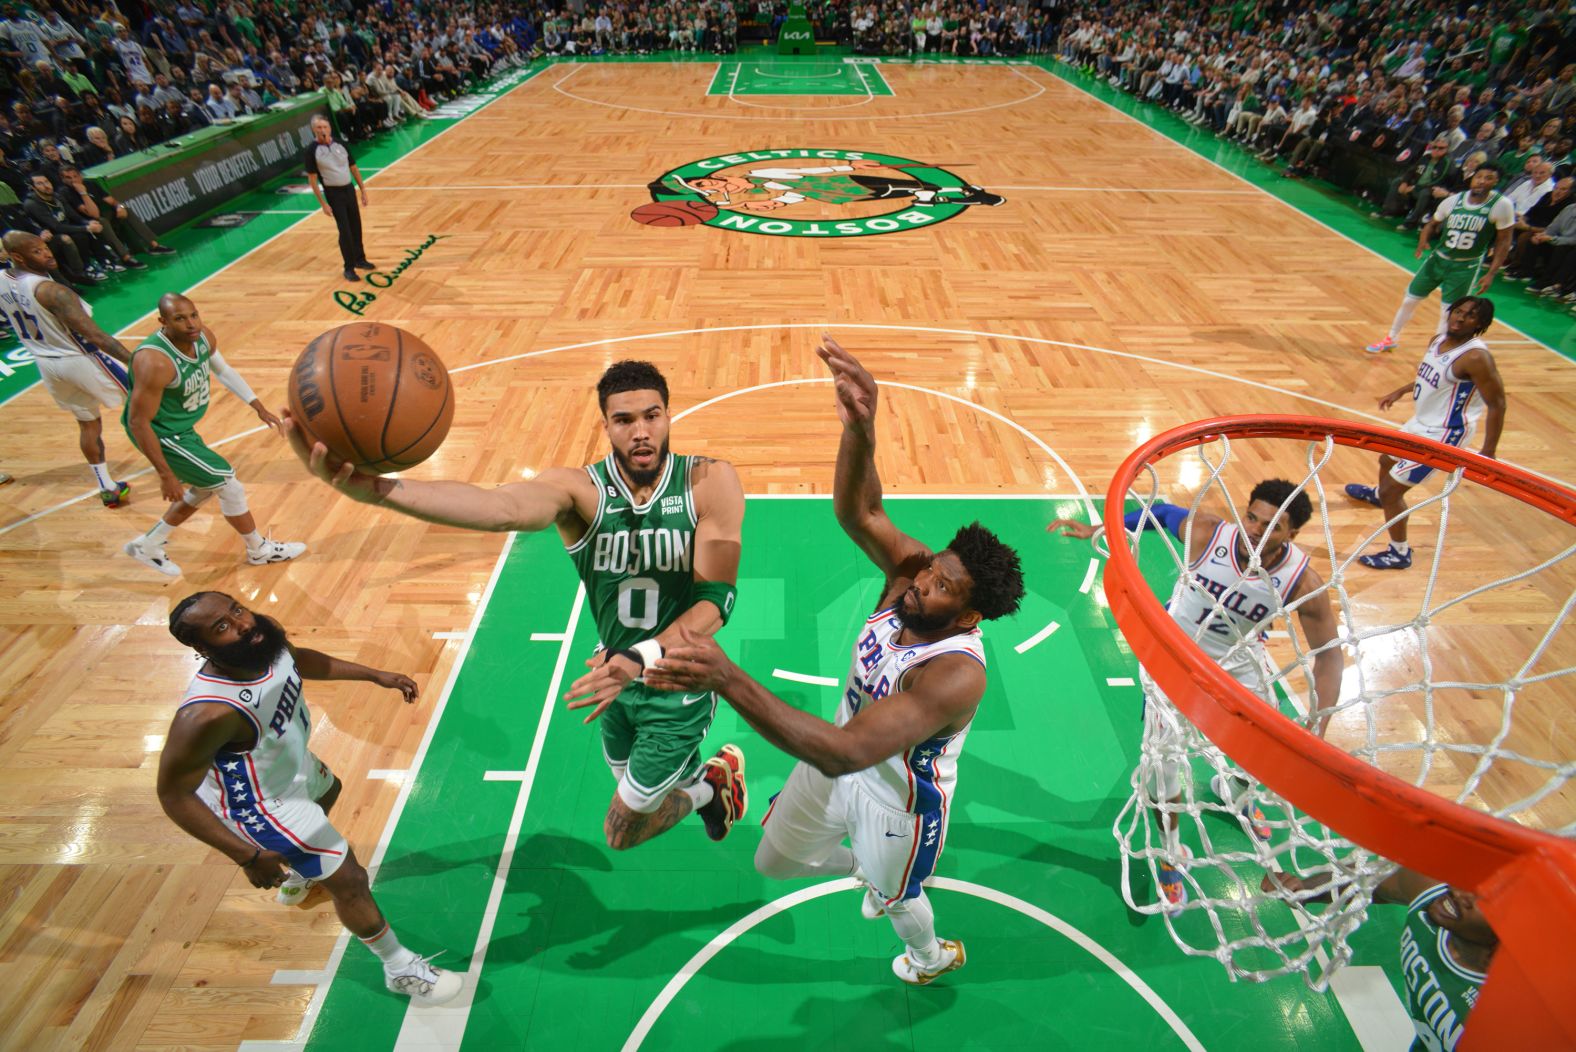 Boston Celtics star Jayson Tatum drives to the basket during Game 7 of the NBA playoff series against Philadelphia on Sunday, May 14. Tatum scored 51 points — <a href="index.php?page=&url=https%3A%2F%2Fwww.cnn.com%2F2023%2F05%2F15%2Fsport%2Fjayson-tatum-boston-celtics-philadelphia-76ers-spt-intl%2Findex.html" target="_blank">a Game 7 record</a> — to lead the Celtics to a 112-88 win and a spot in the Eastern Conference finals.